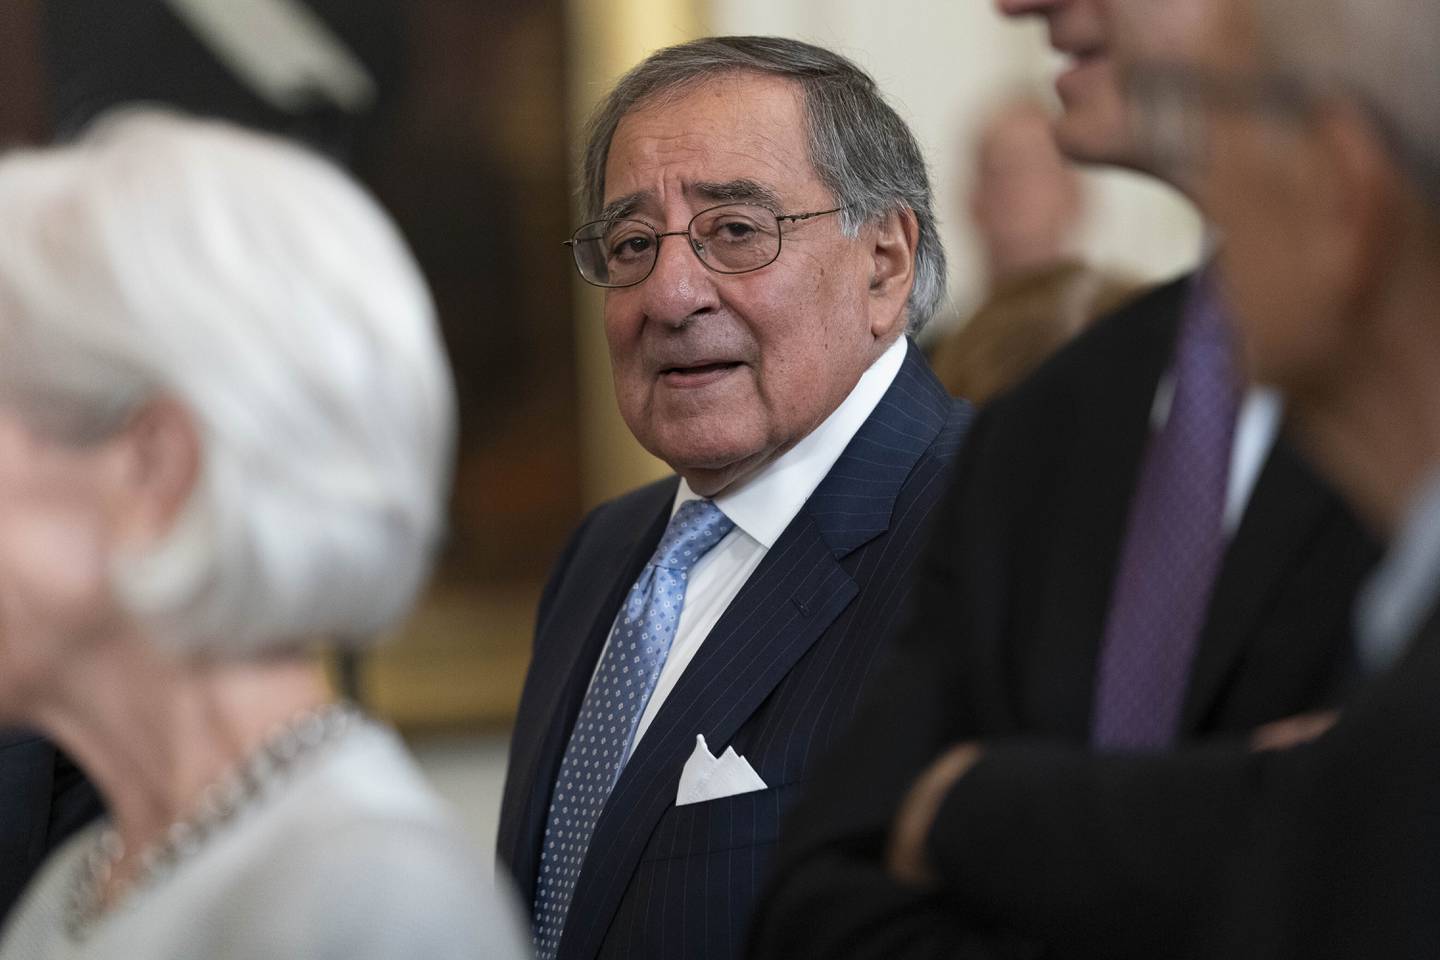 Former Secretary of Defense and CIA Director Leon Panetta stands in the audience during an event in the East Room of the White House in Washington, Sept. 7, 2022.